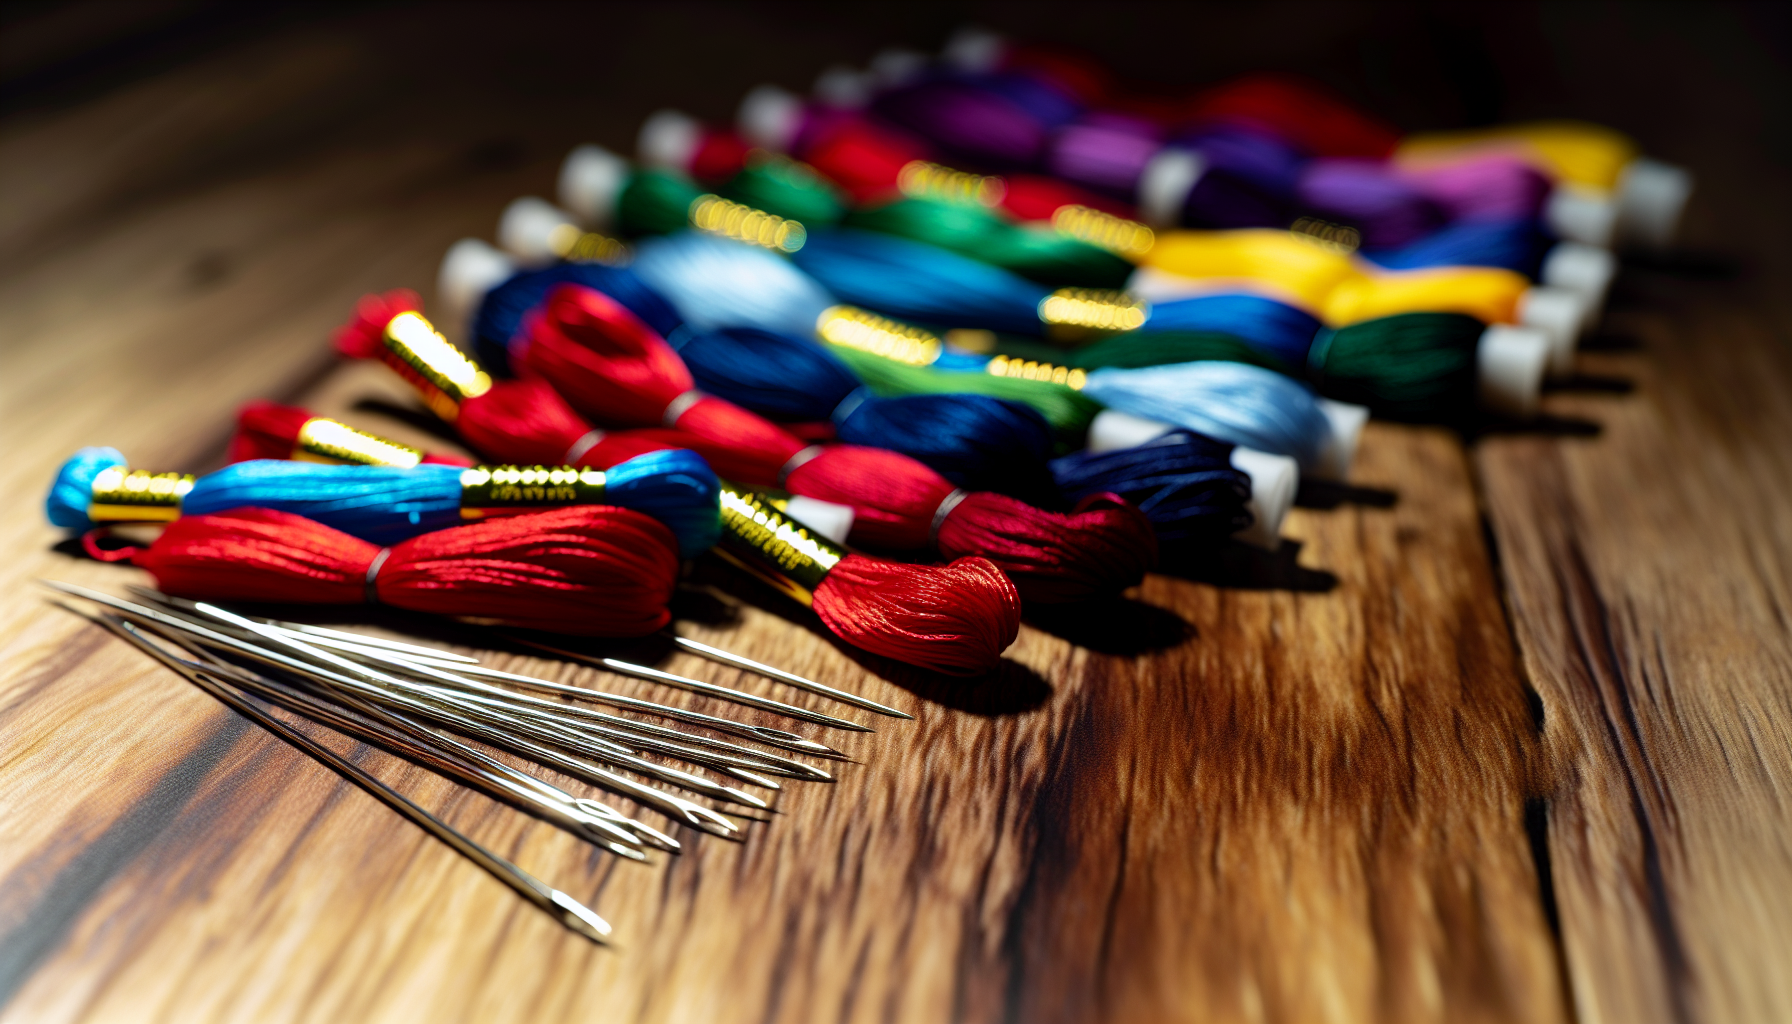 Various embroidery threads and needles on a wooden table